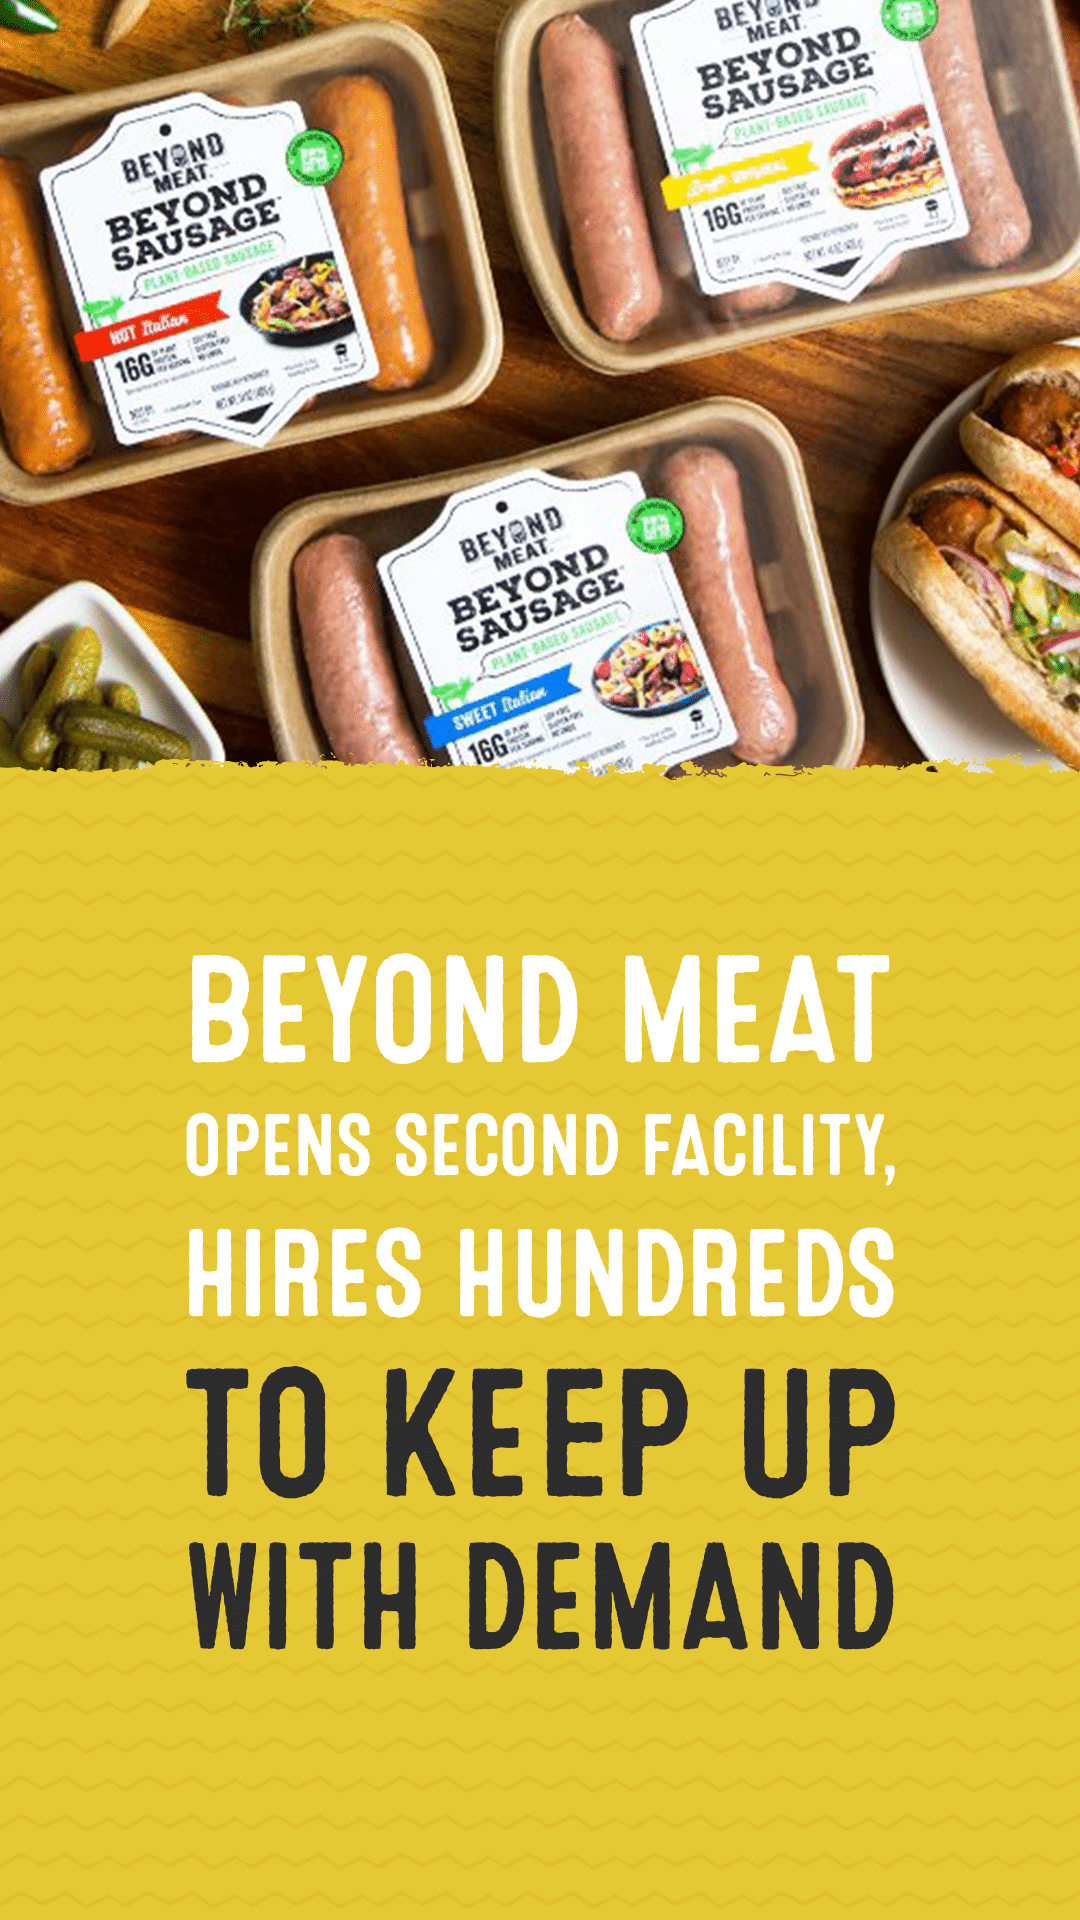 Beyond Meat Opens Second Facility, Hires Hundreds to Keep Up With Demand